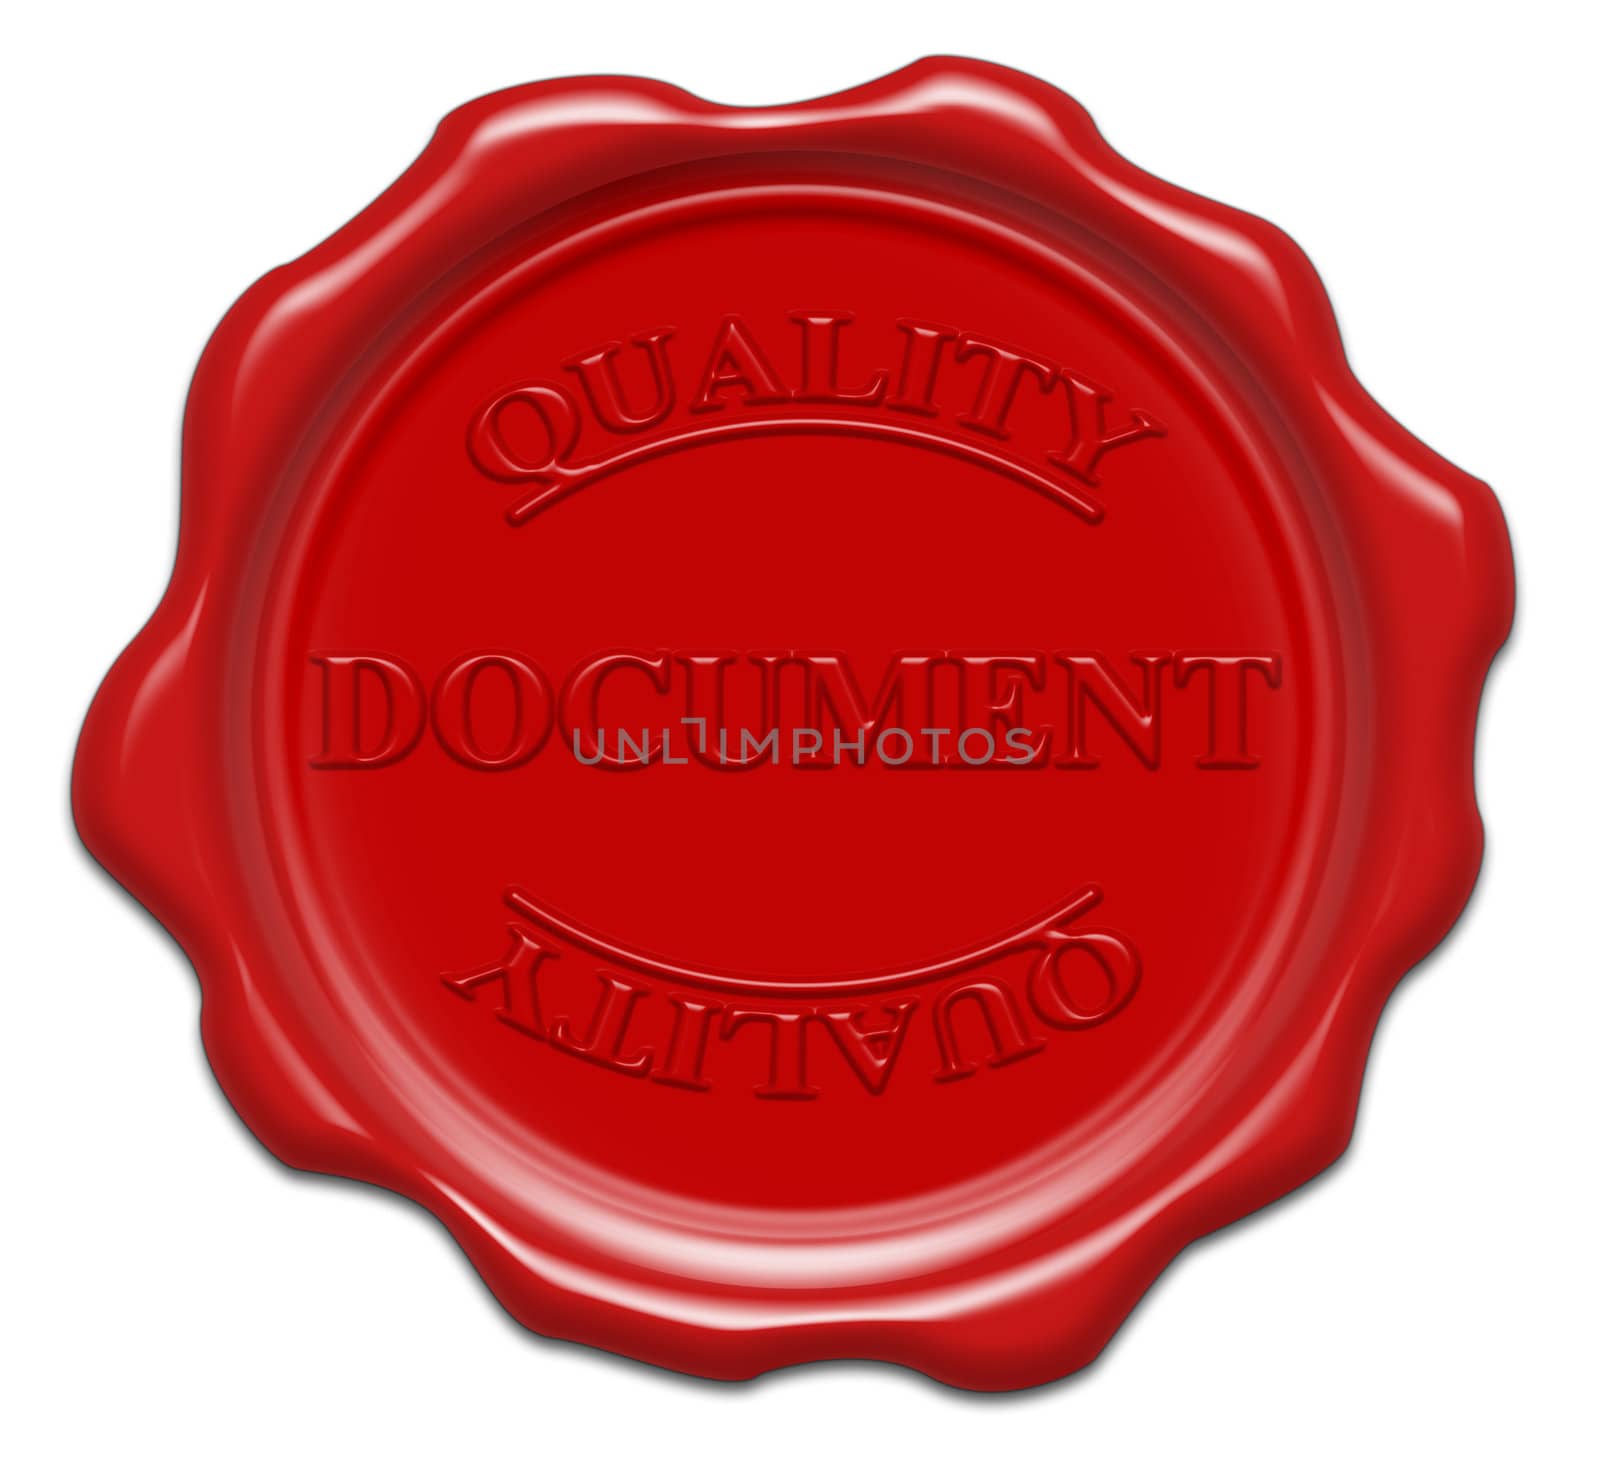 quality document - illustration red wax seal isolated on white b by mozzyb